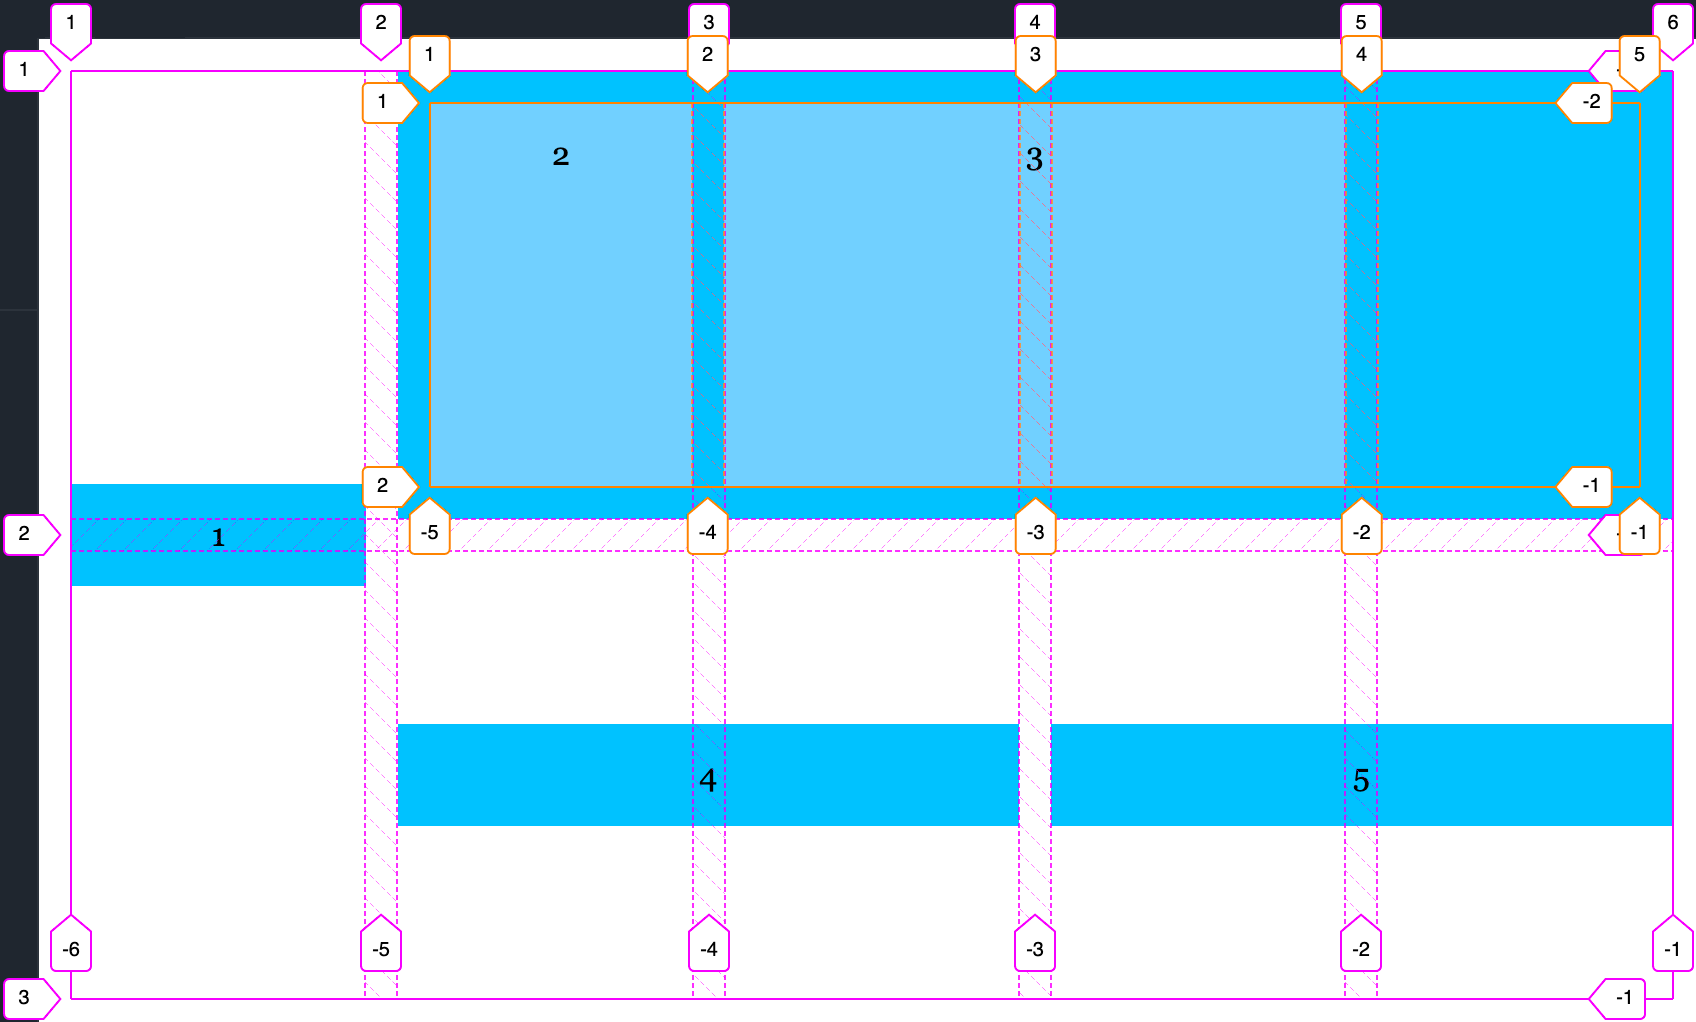 Self-alignment properties on subgrid container do not apply